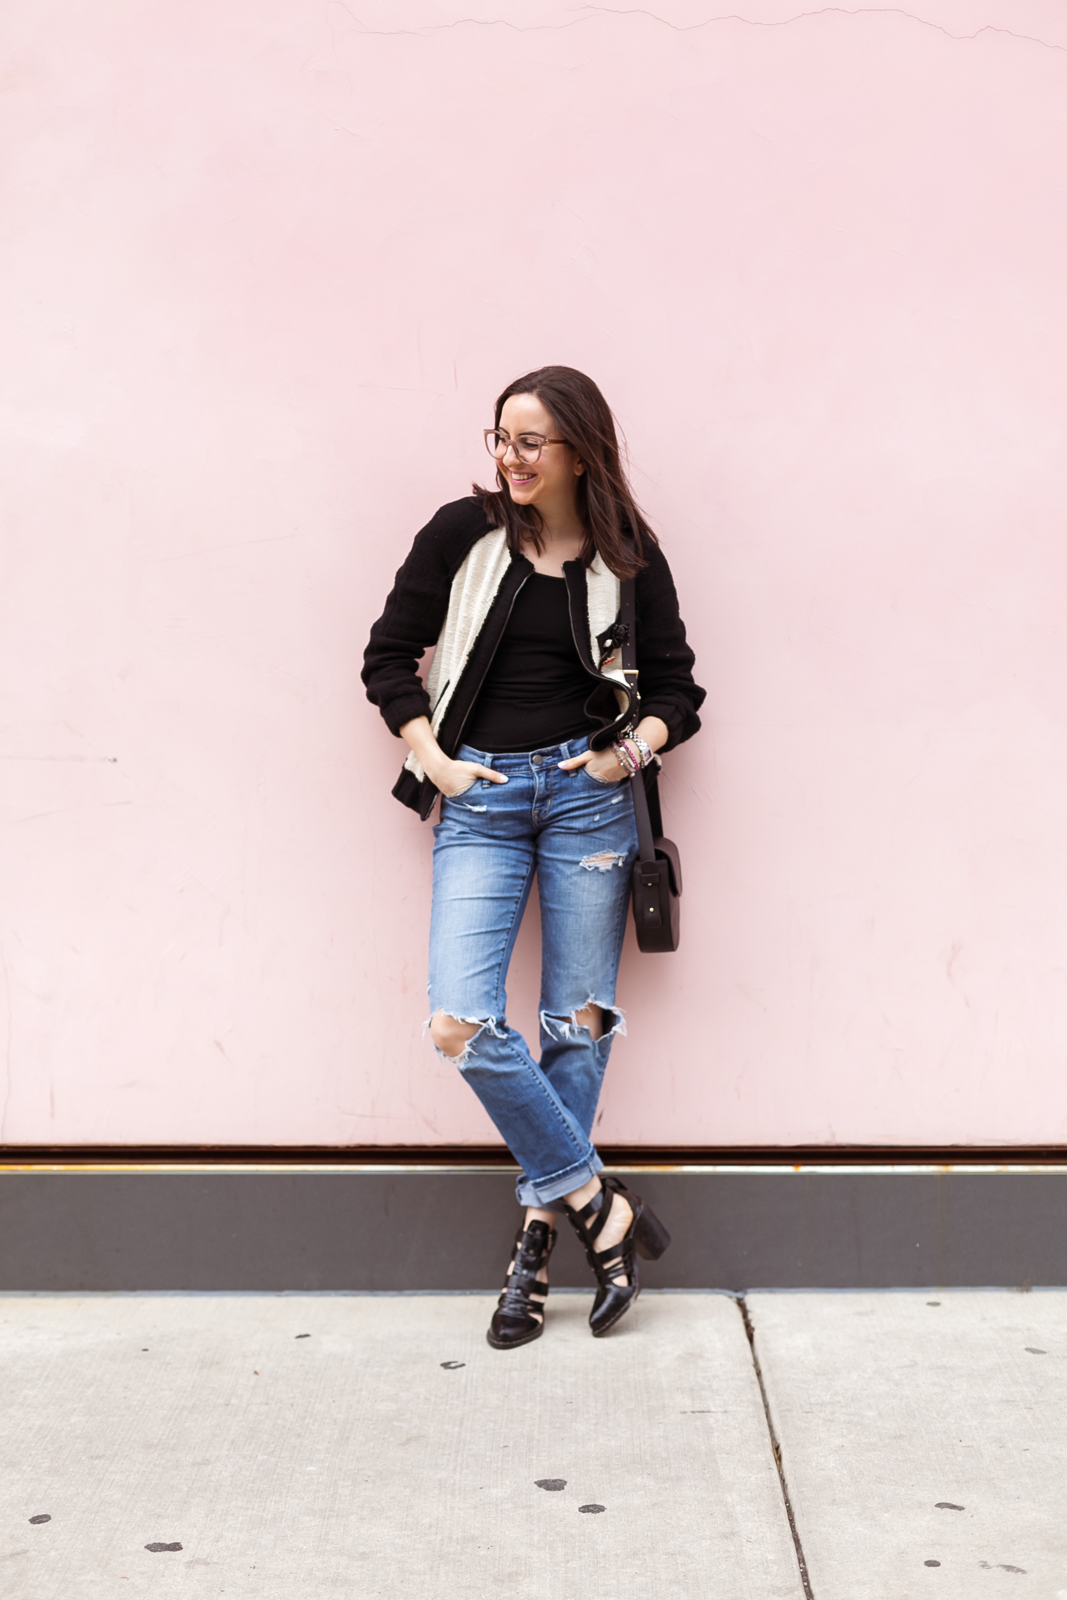 Yana of NoMad Luxuries wearing ripped jeans with a floral embroidered jacket from Zara for Spring style in Chicago